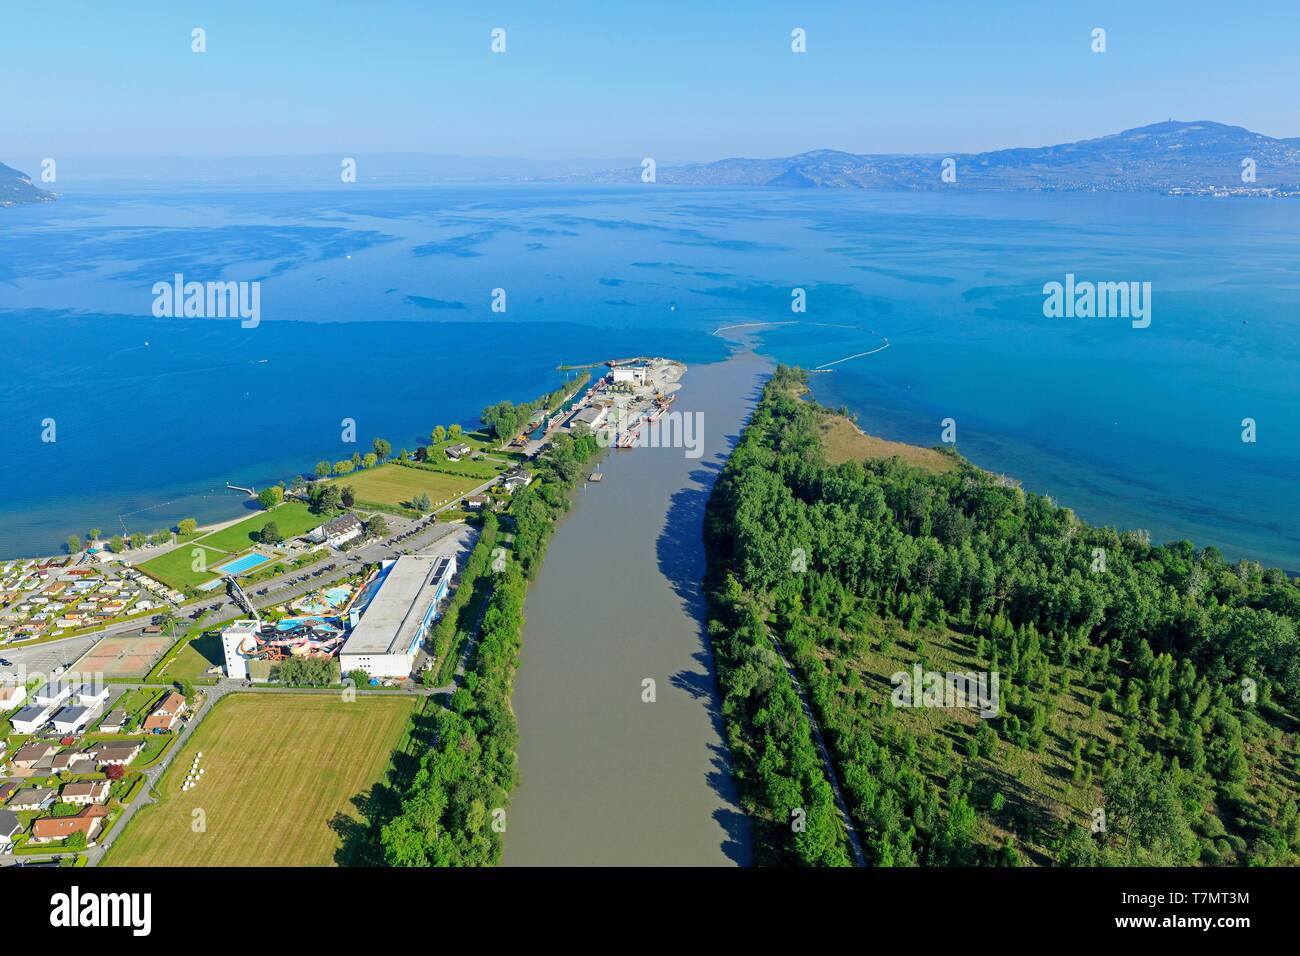 Switzerland, canton of Vaud district of Aigle and canton of Valais, district of Monthey, Noville, Lake Geneva, mouth of the Rhone, Port Valais on the left (aerial view) Stock Photo